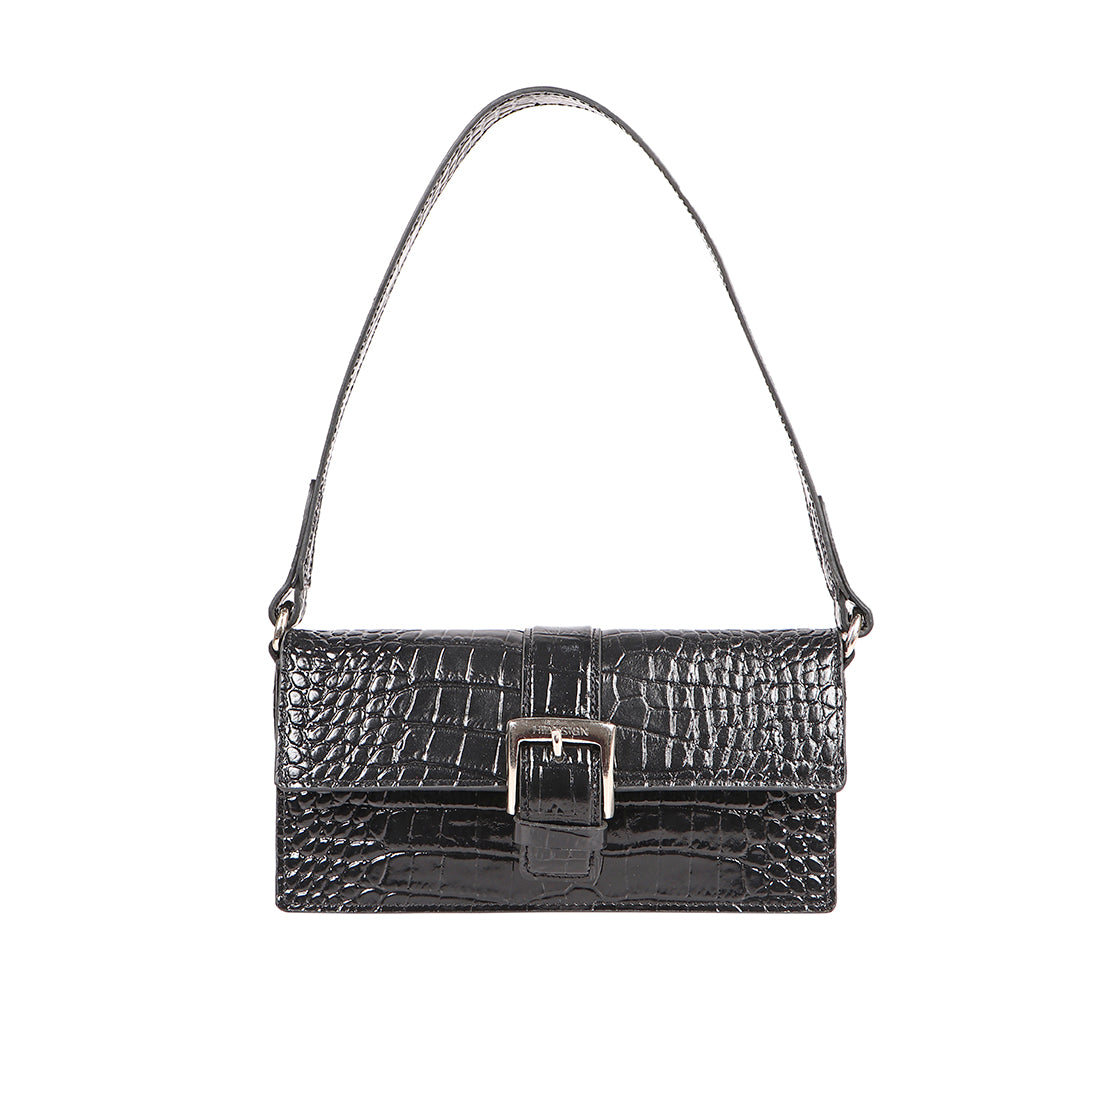 Wholesale Black Handbag, Wholesale Black Handbag Manufacturers & Suppliers  | Made-in-China.com